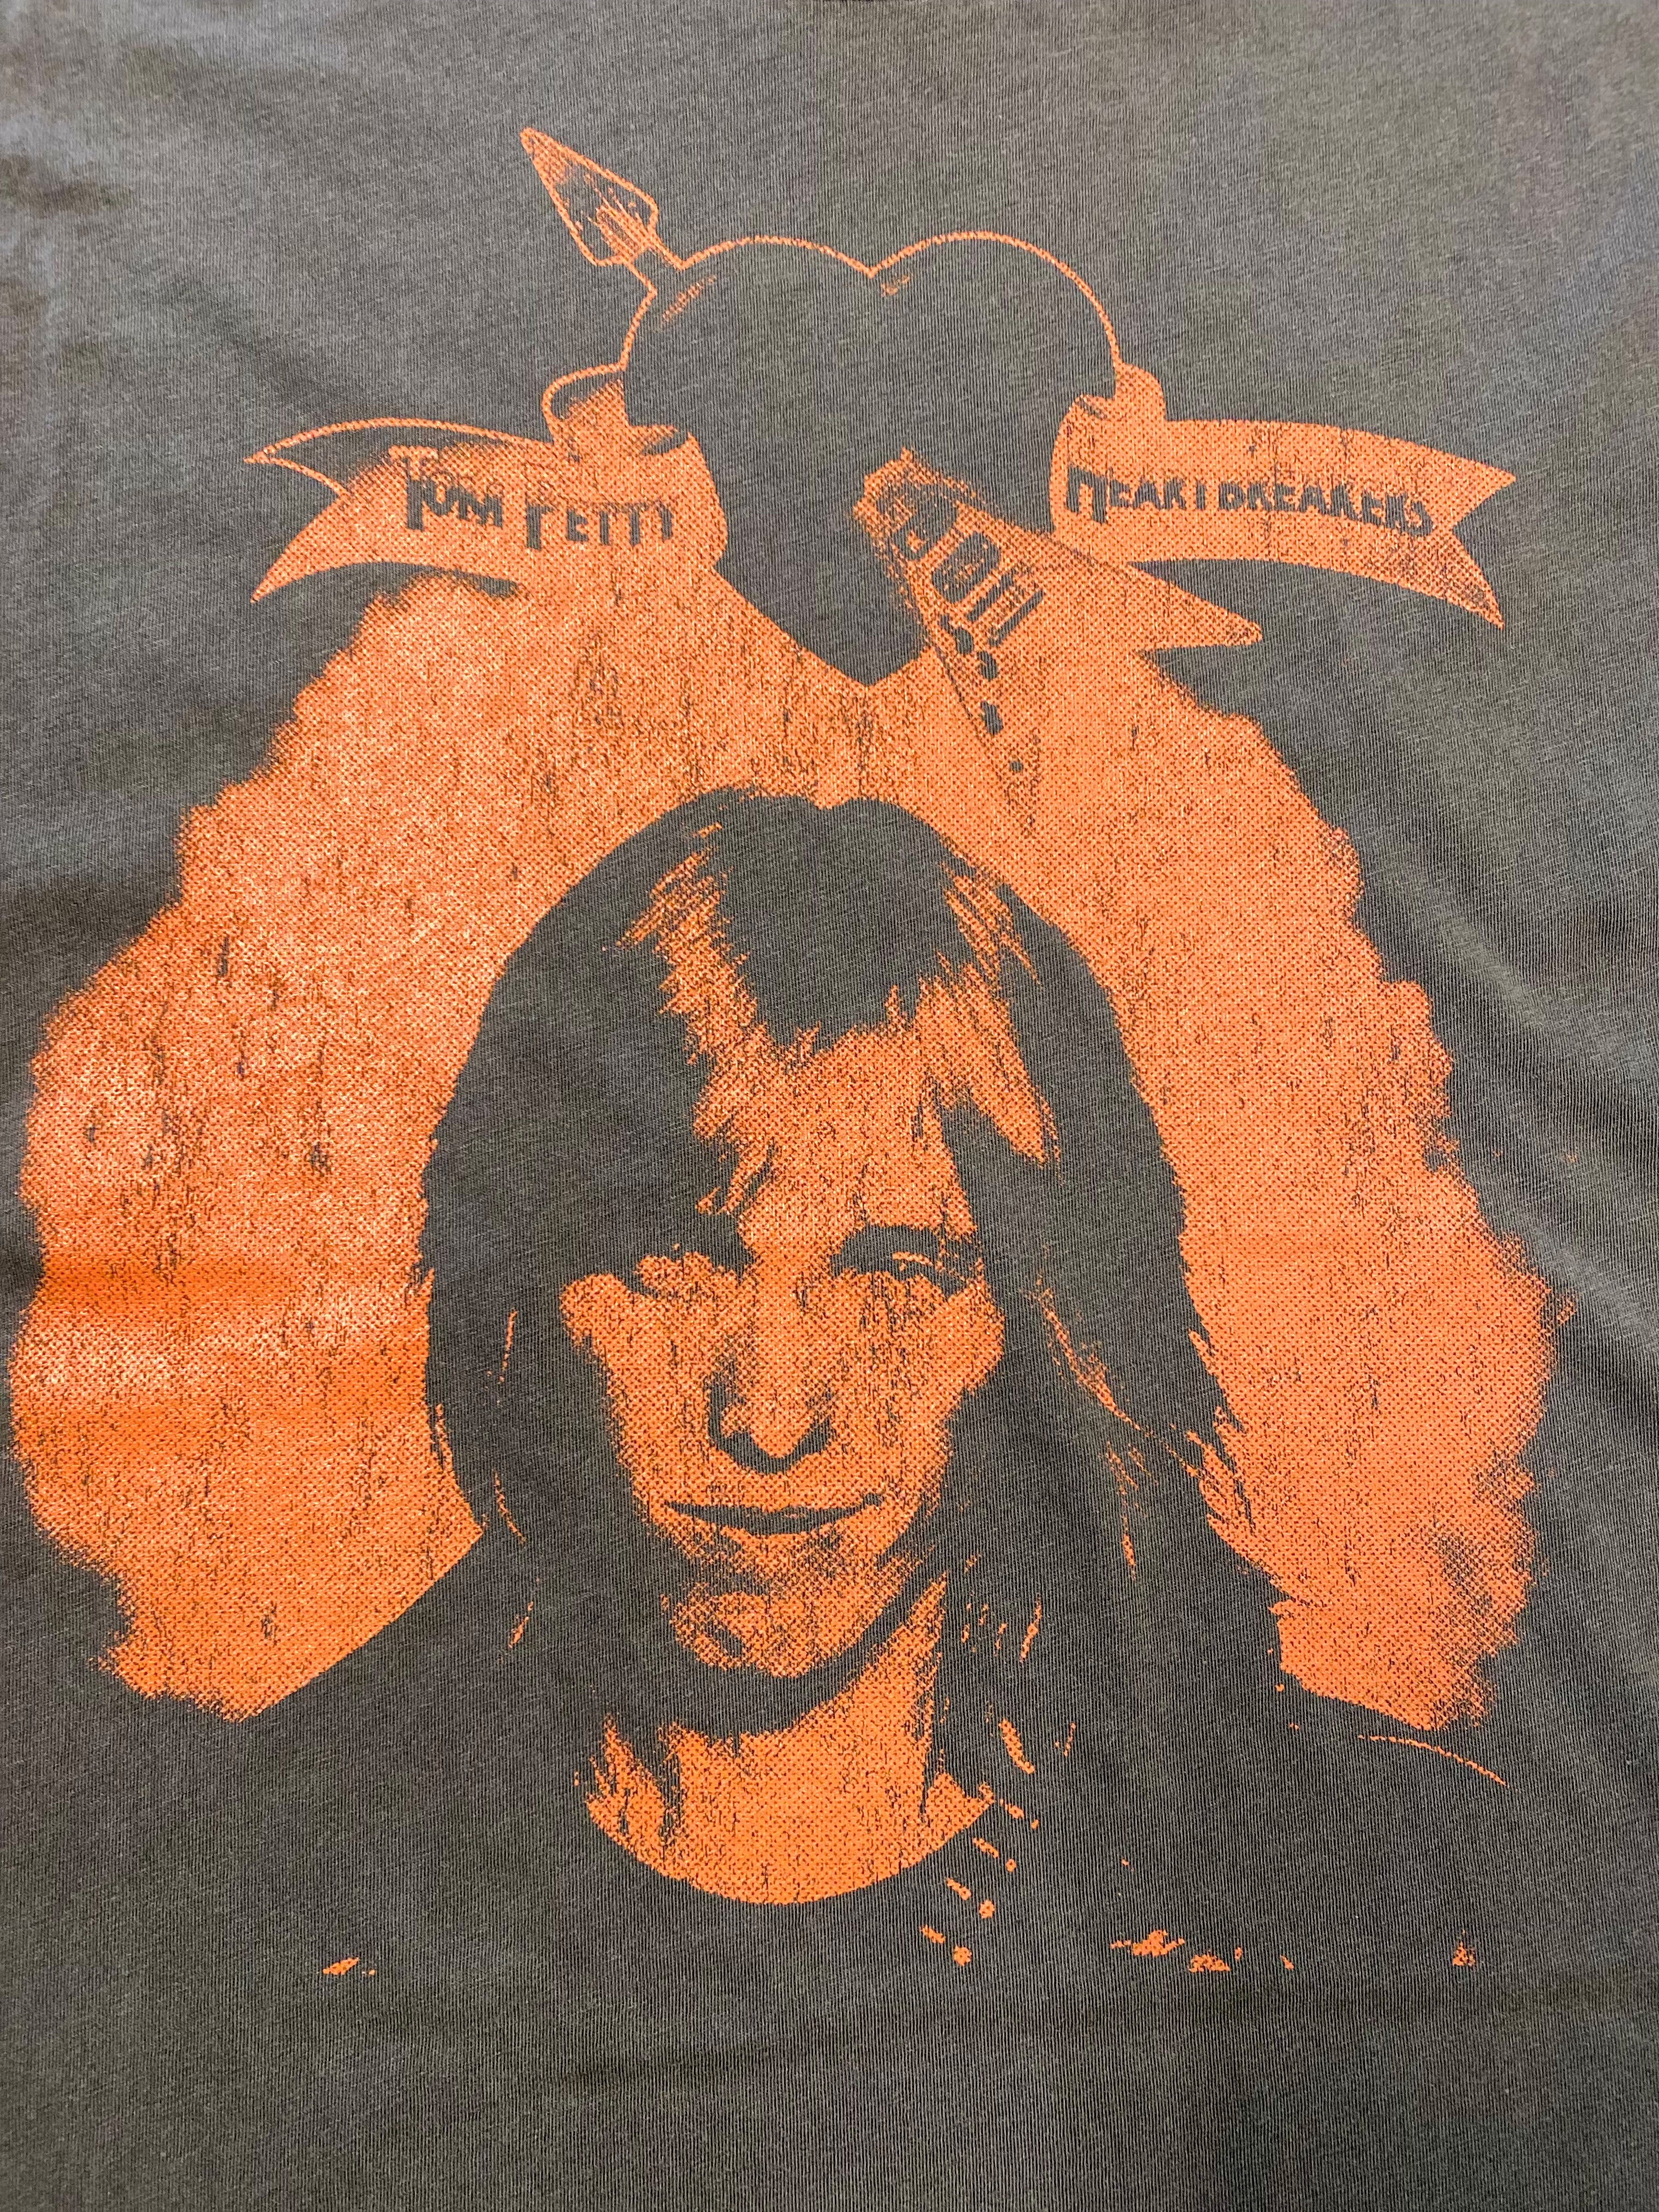 Tom Petty and the Heartbreakers at The Whiskey Muscle Tee